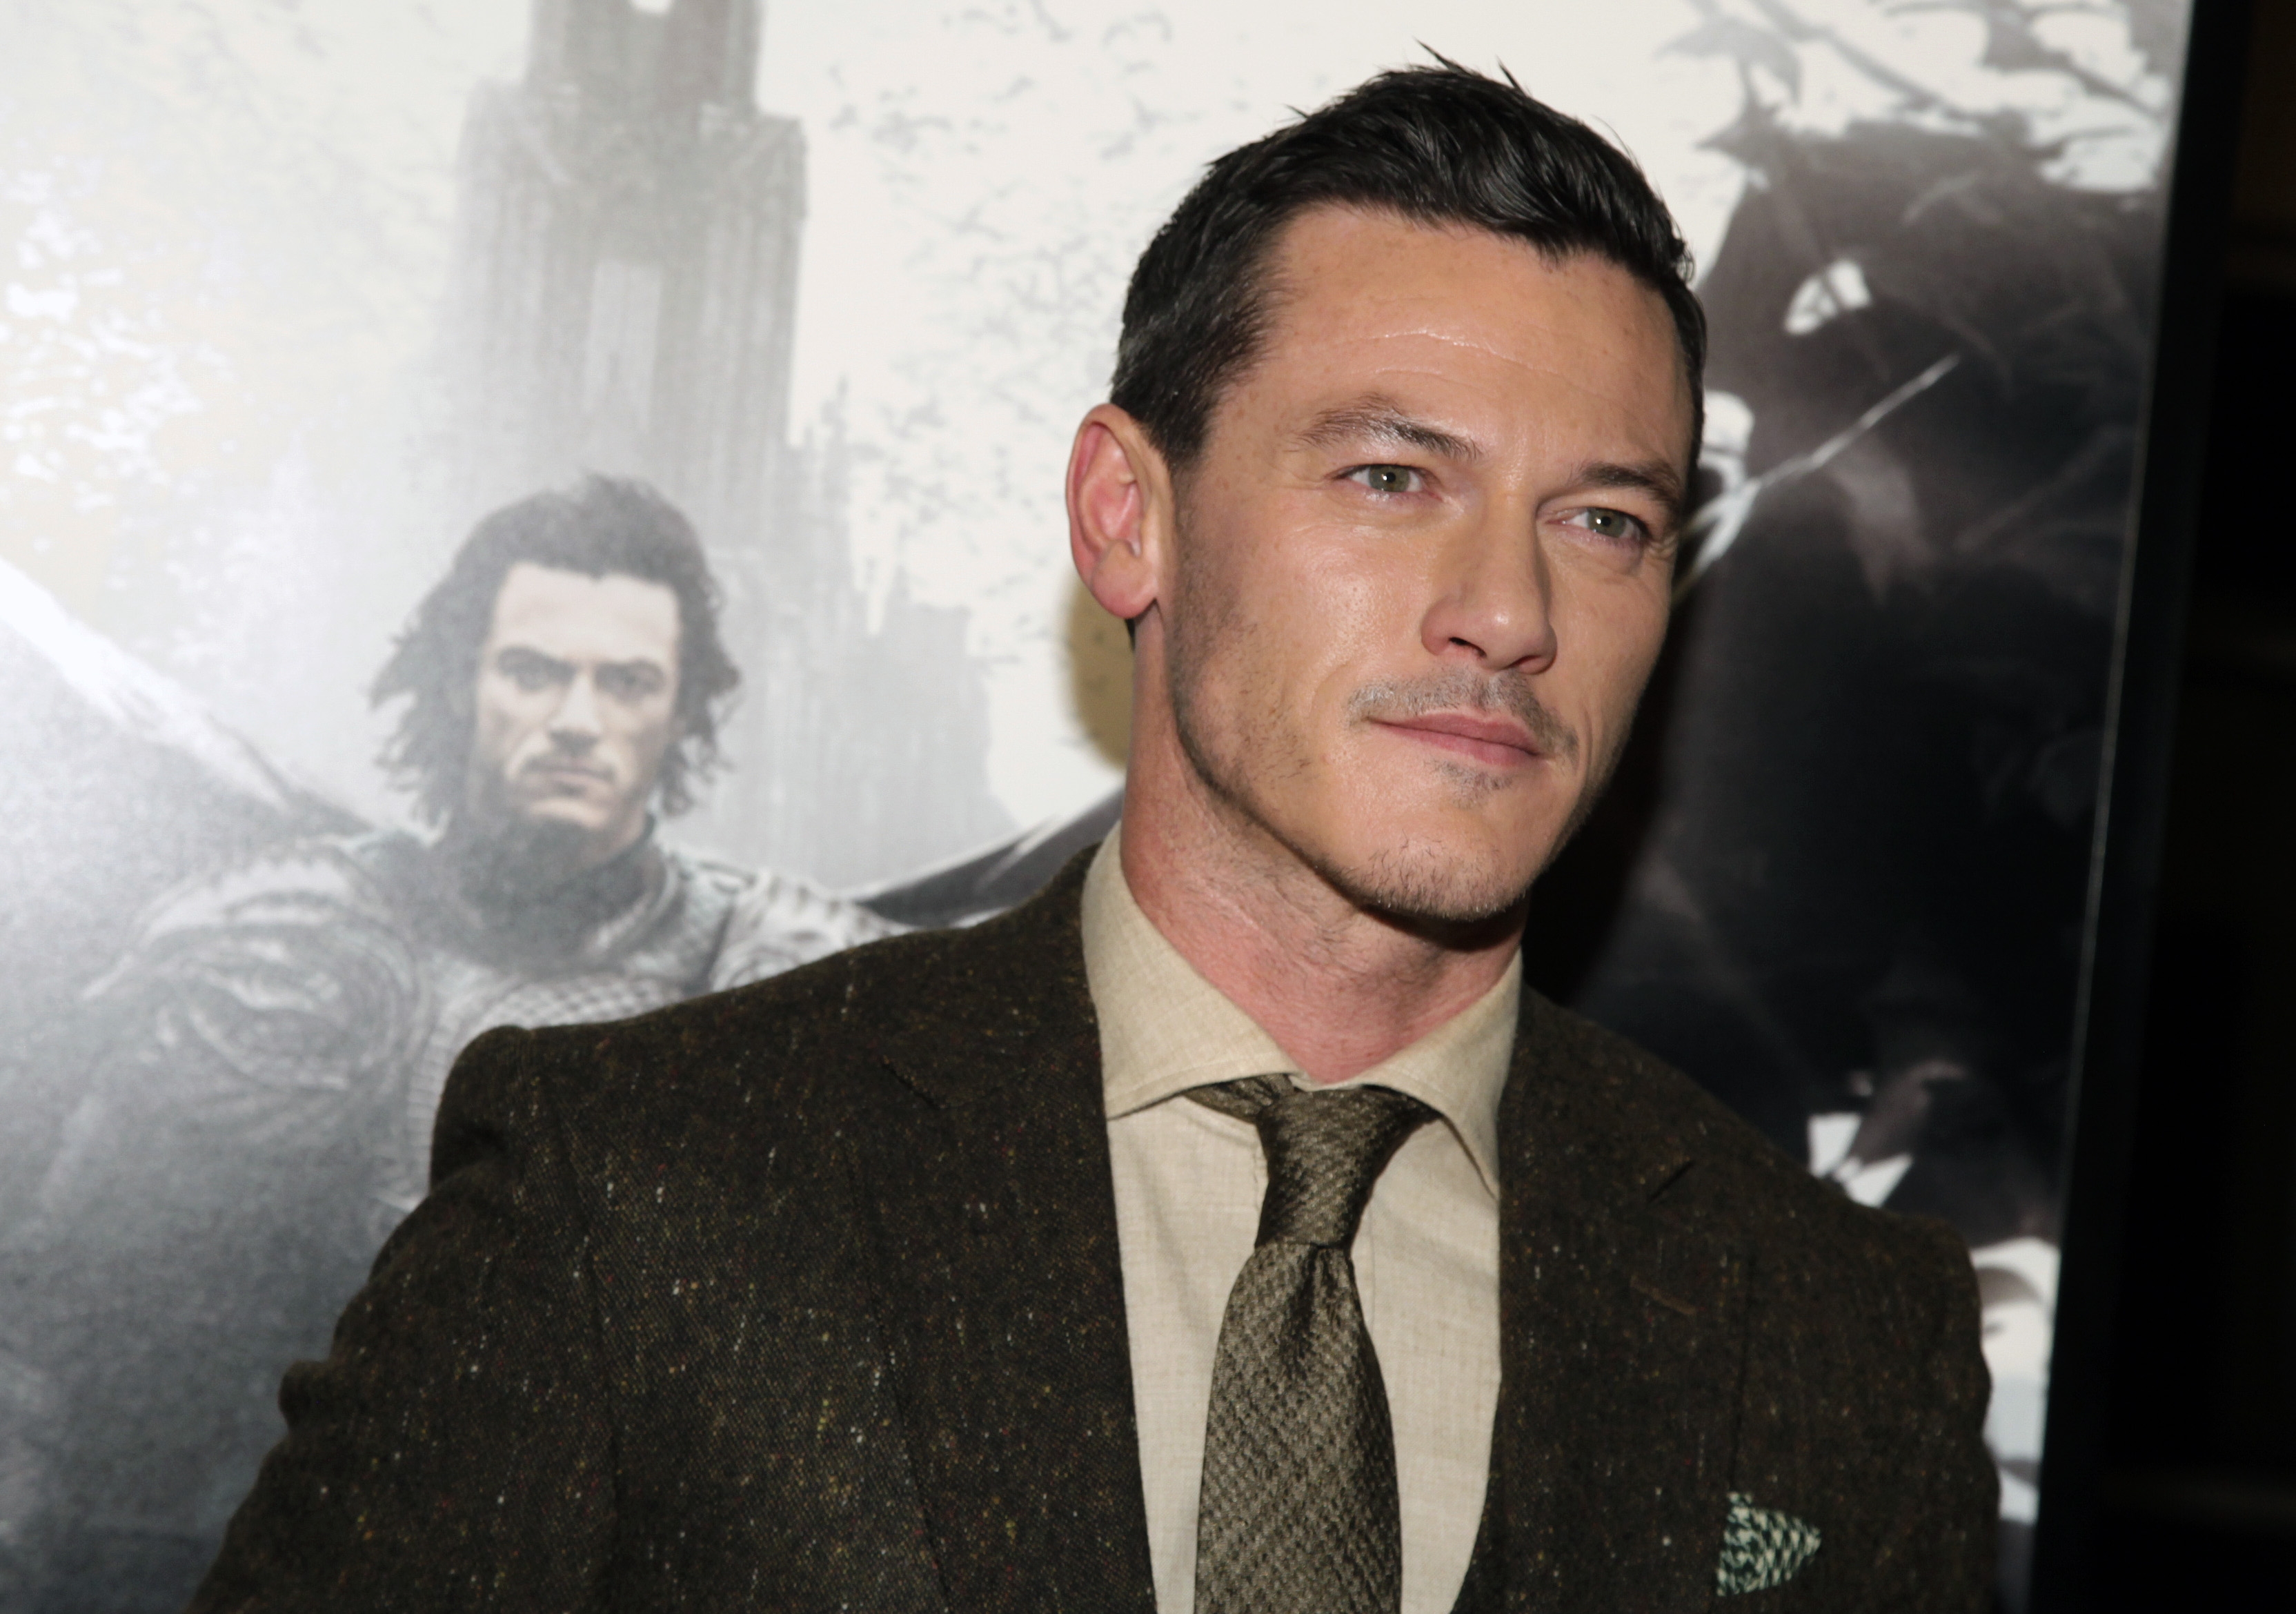 Luke Evans (Photo by Andy Kropa/Invision/AP) (Andy Kropa&mdash;Andy Kropa /Invision/AP)